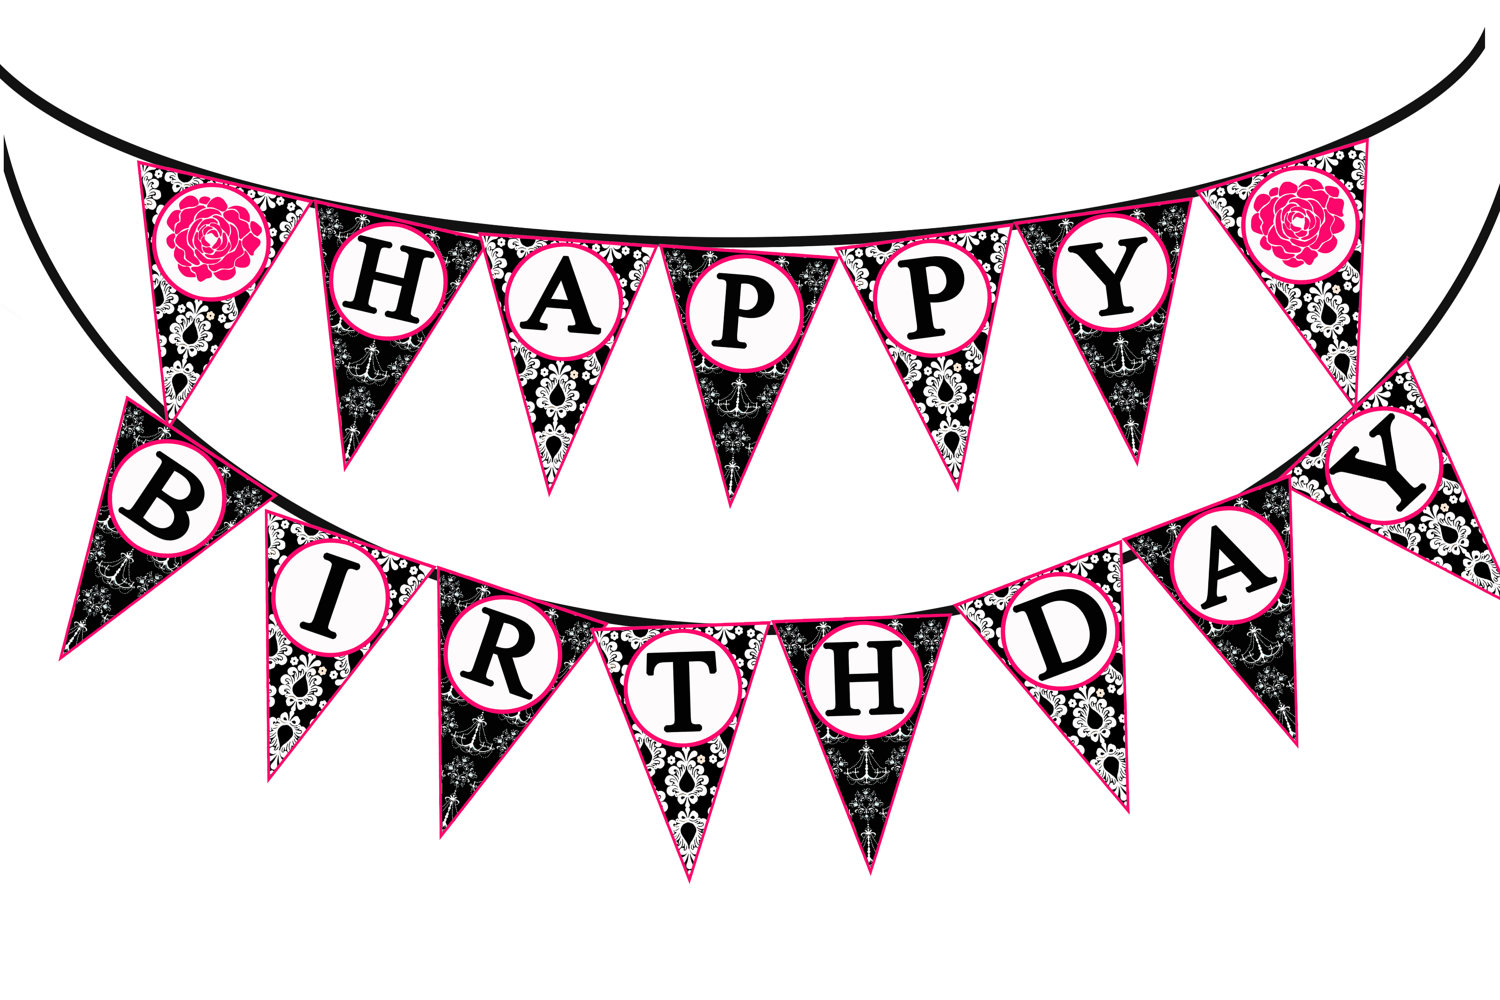 Happy Birthday Banner Clip Art - Free Clipart Images